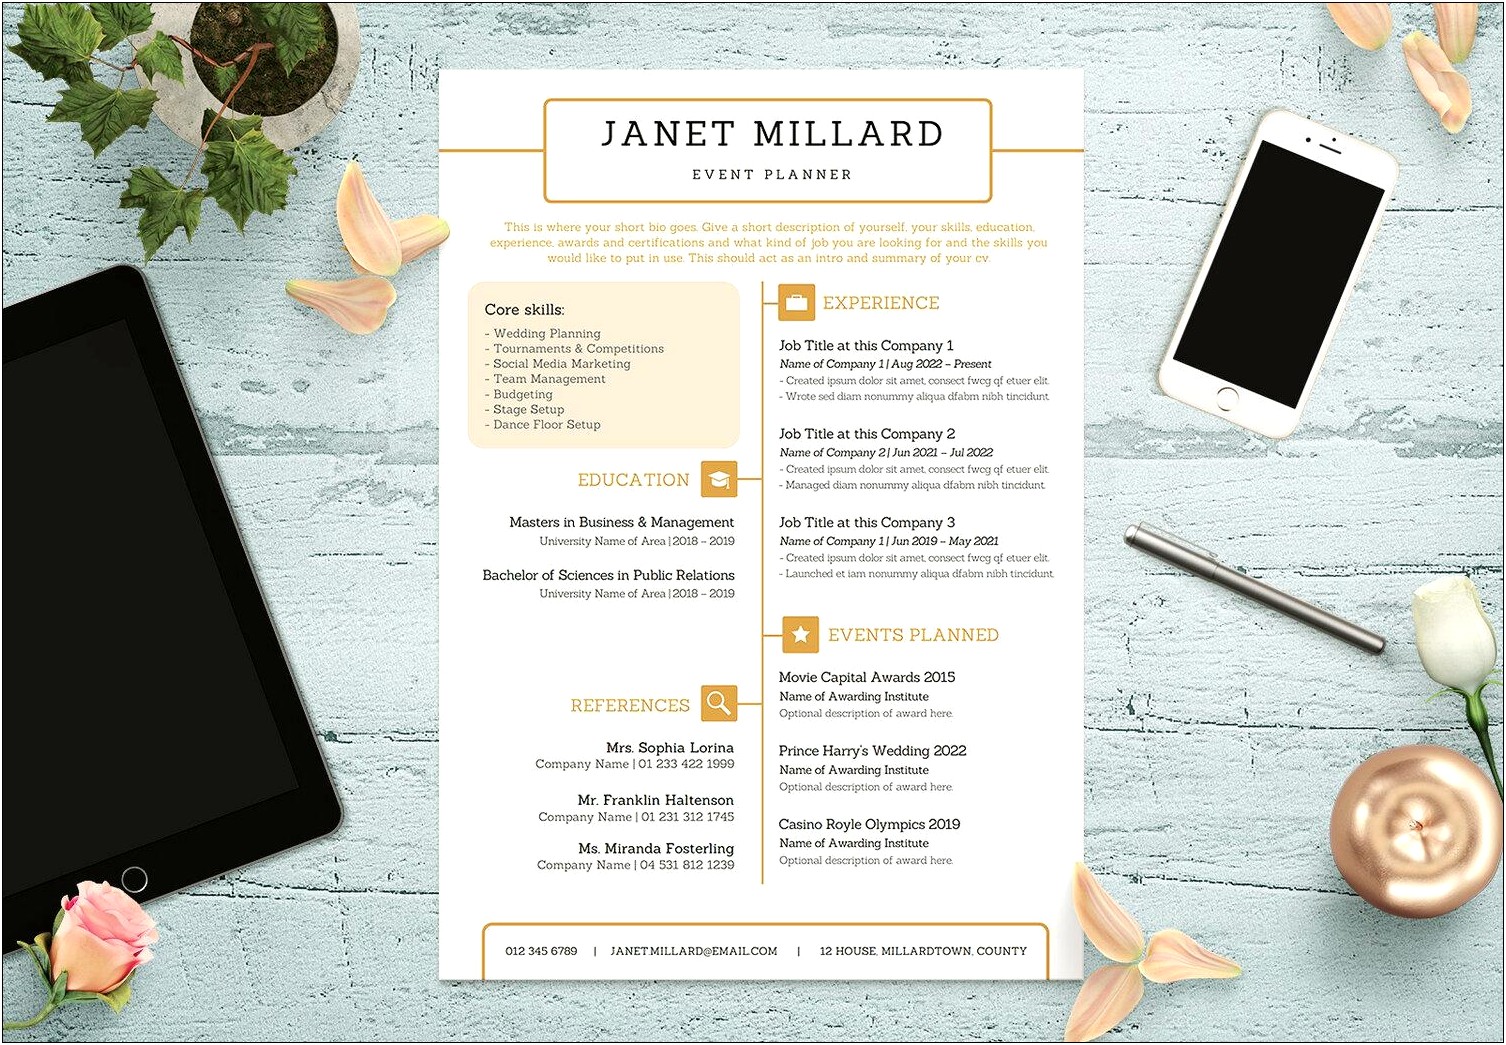 Event Planning Resume Samples That Are Free